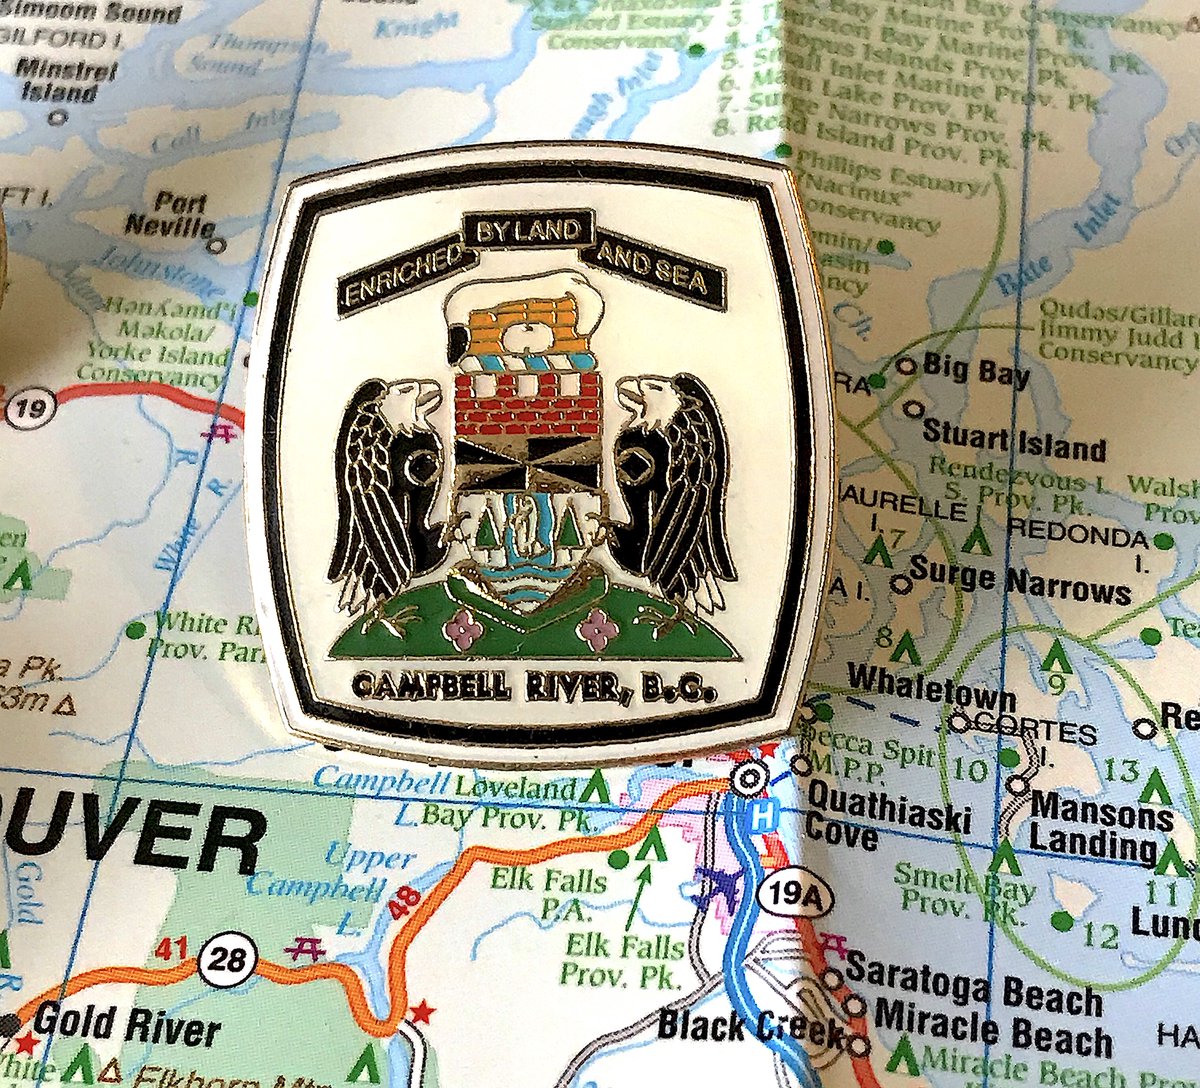 144. CAMPBELL RIVER- crest crest crest- those are sinister looking birds- is that yellow brick wearing headphones?